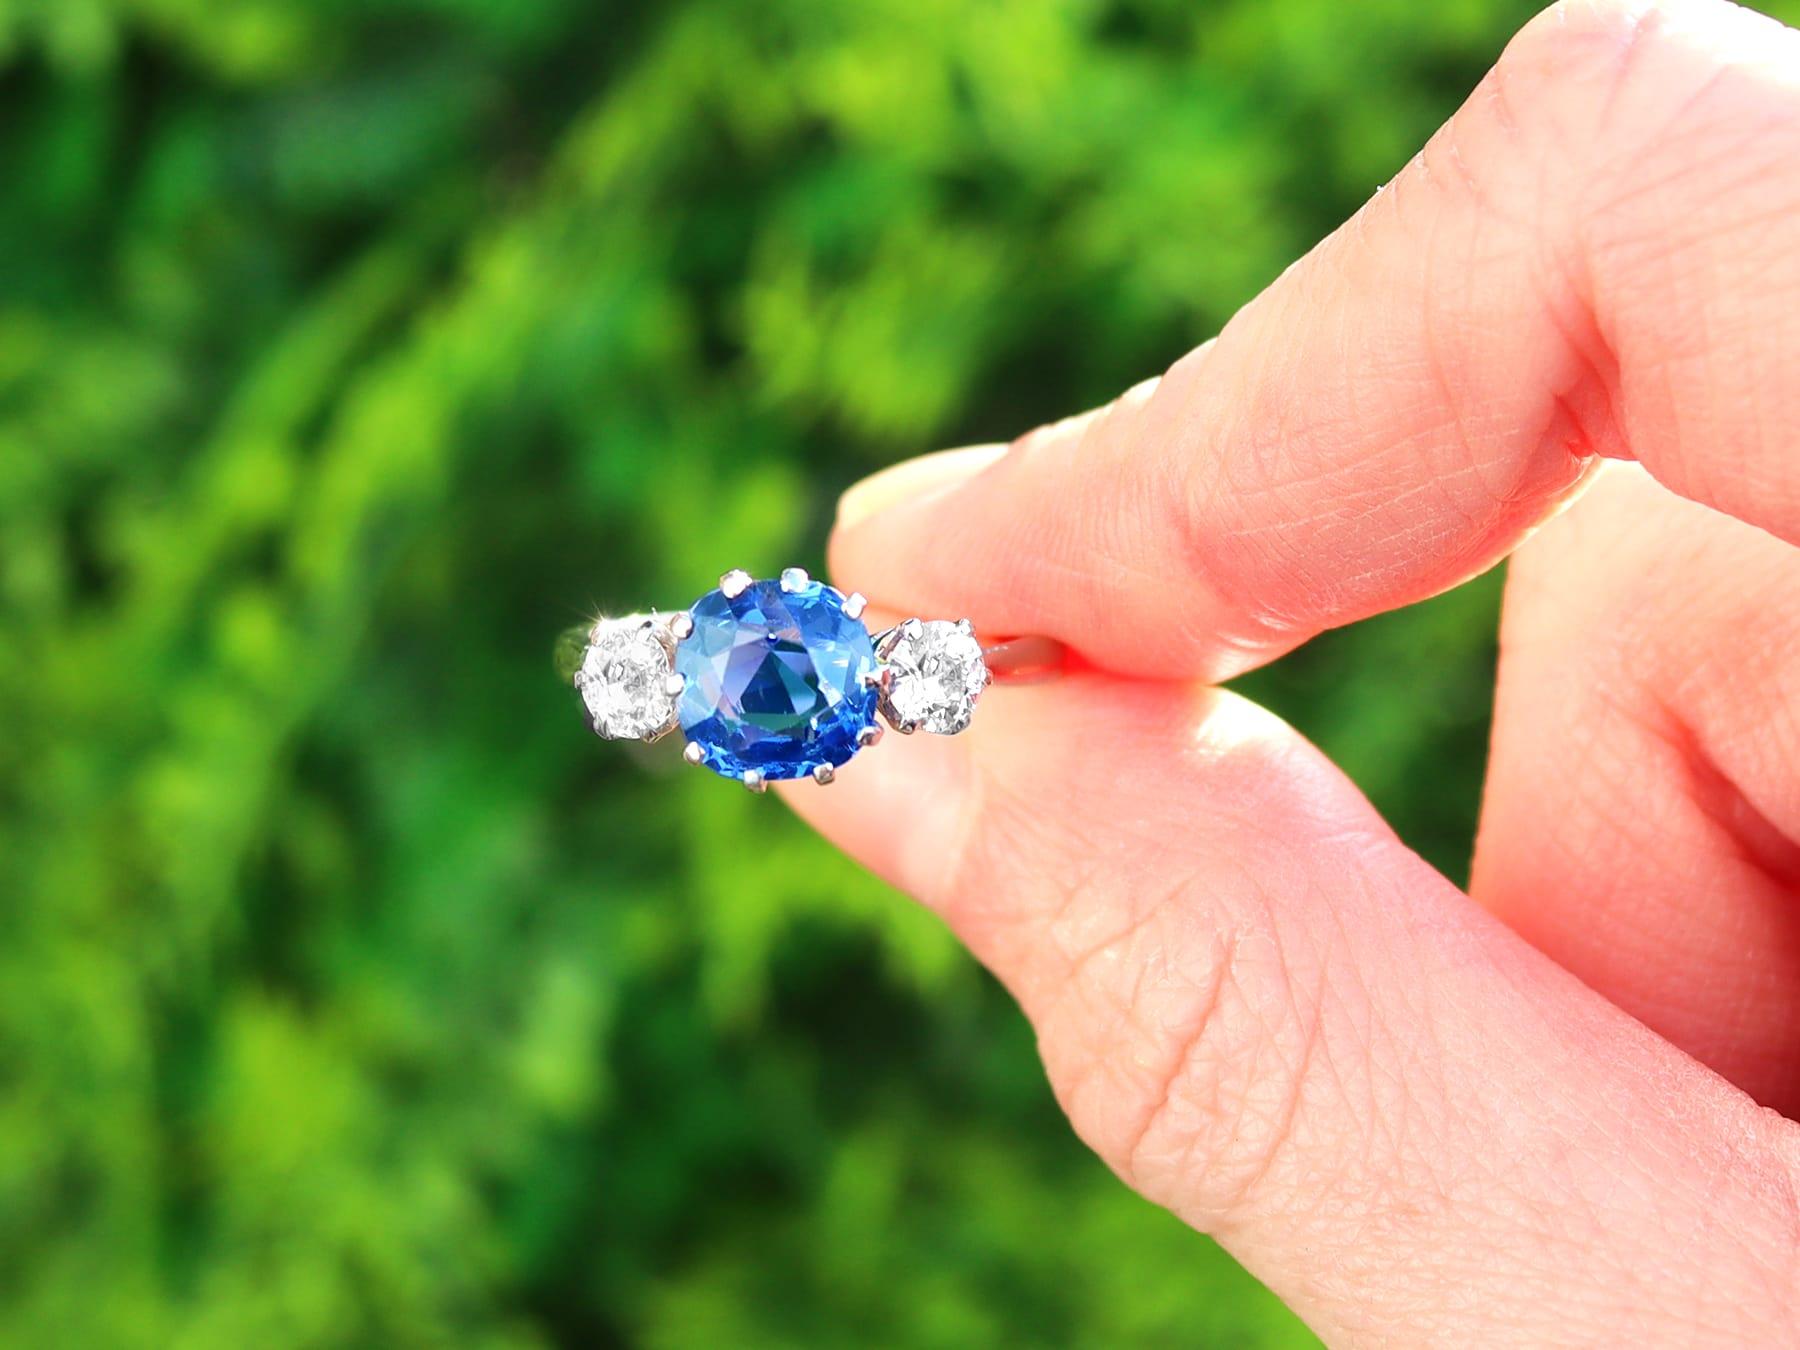 A stunning, fine and impressive antique unheated 2.20 carat sapphire and 0.72 carat diamond, 18 carat white gold trilogy ring; part of our diverse antique jewellery collections

This stunning, fine and impressive antique sapphire and diamond ring